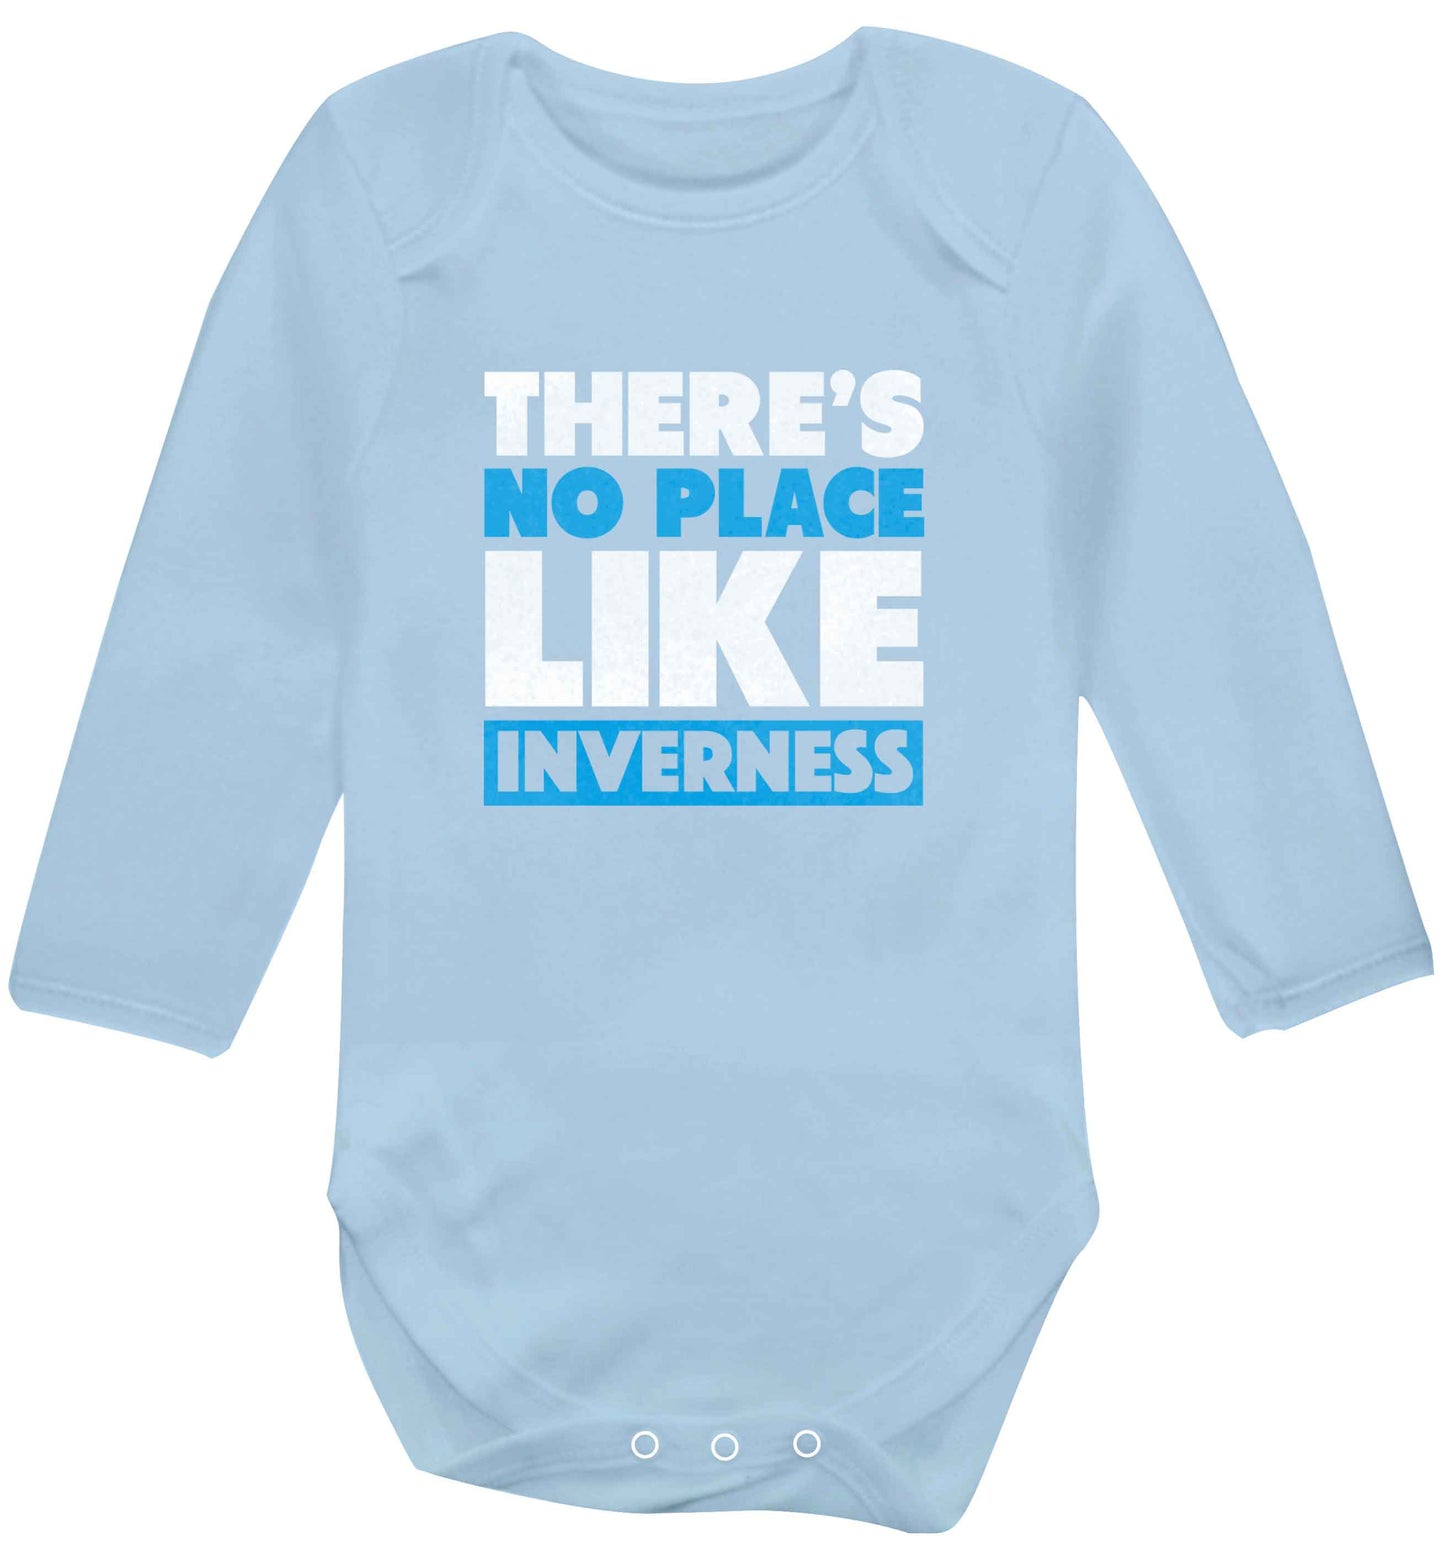 There's no place like Inverness baby vest long sleeved pale blue 6-12 months